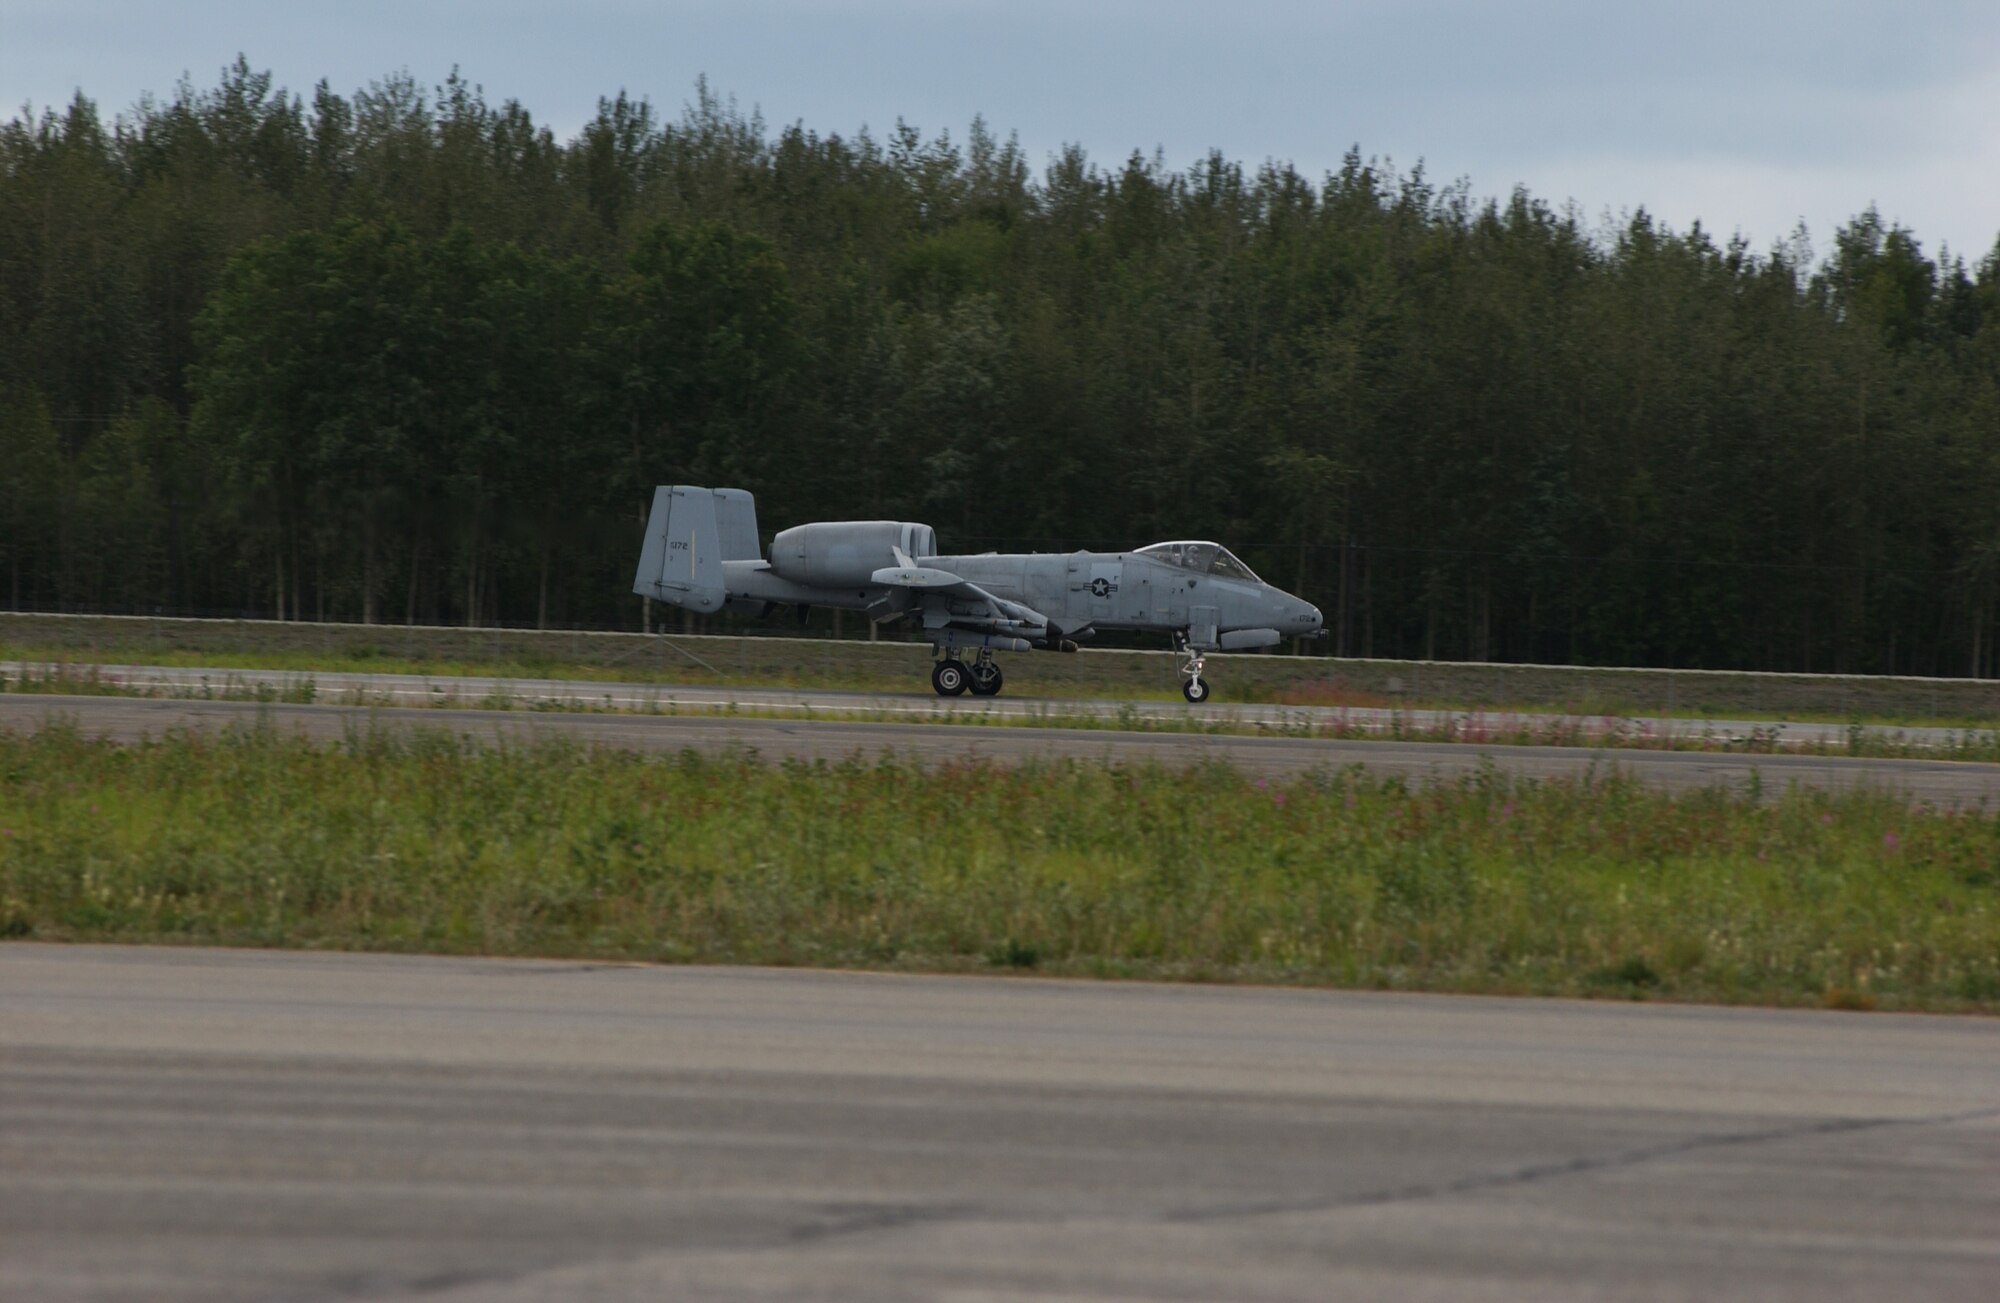 EIELSON AIR FORCE BASE, Alaska -- An A-10 Thunderbolt from the 355th Fighter Squadron lands after the last flight at Eielson AFB on July 31. The first two A-10's arrived at Eielson on December 18, 1981, while the last two A-10's are set to leave on August 15, 2007 to Moody AFB, Ga., and Mountain Home AFB, Idaho (U.S. Air Force Photo by Airman 1st Class Jonathan Snyder)